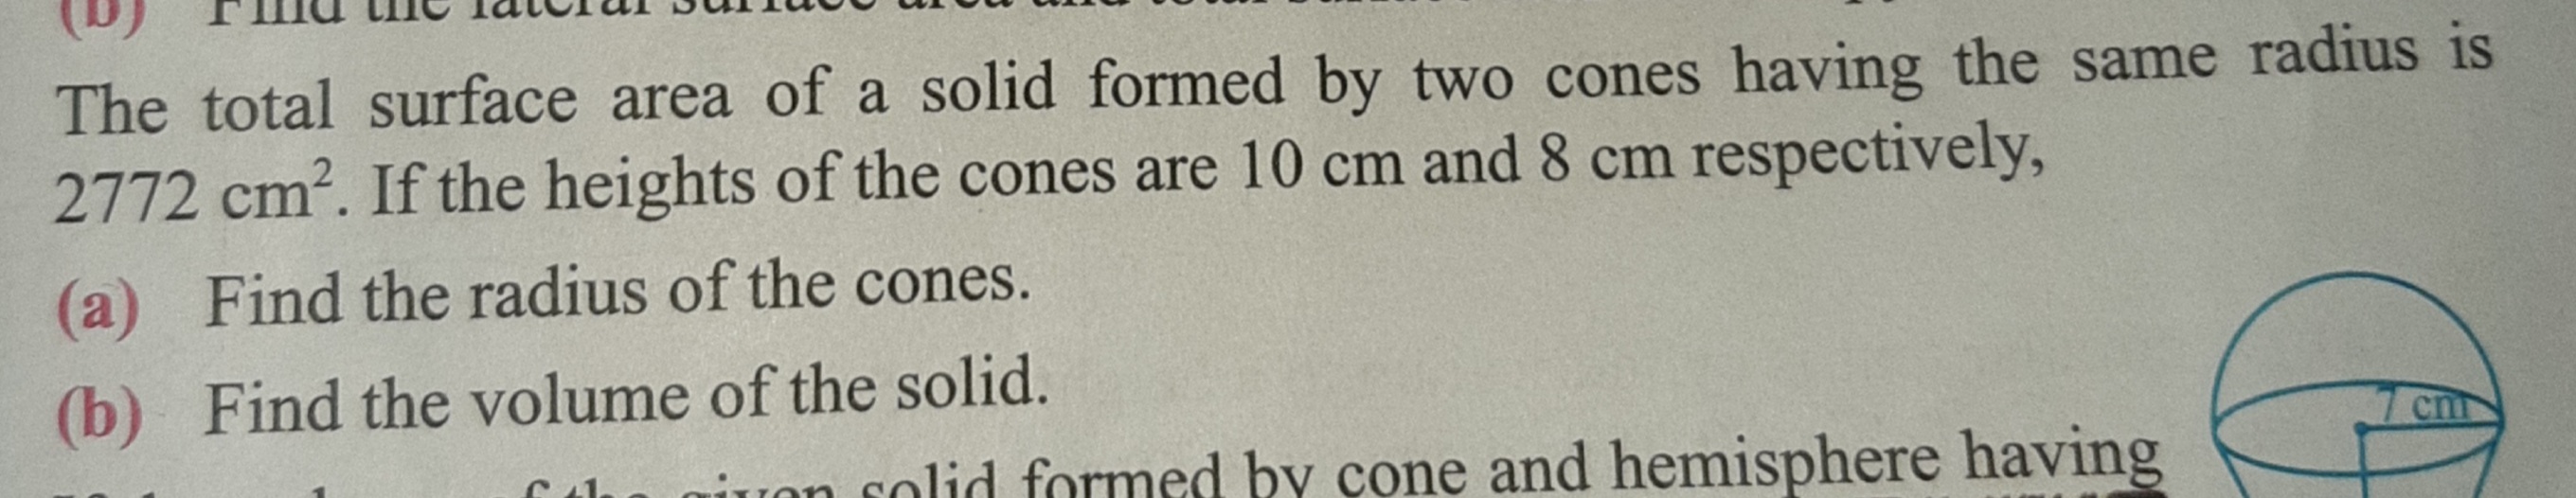 The total surface area of a solid formed by two cones having the same 